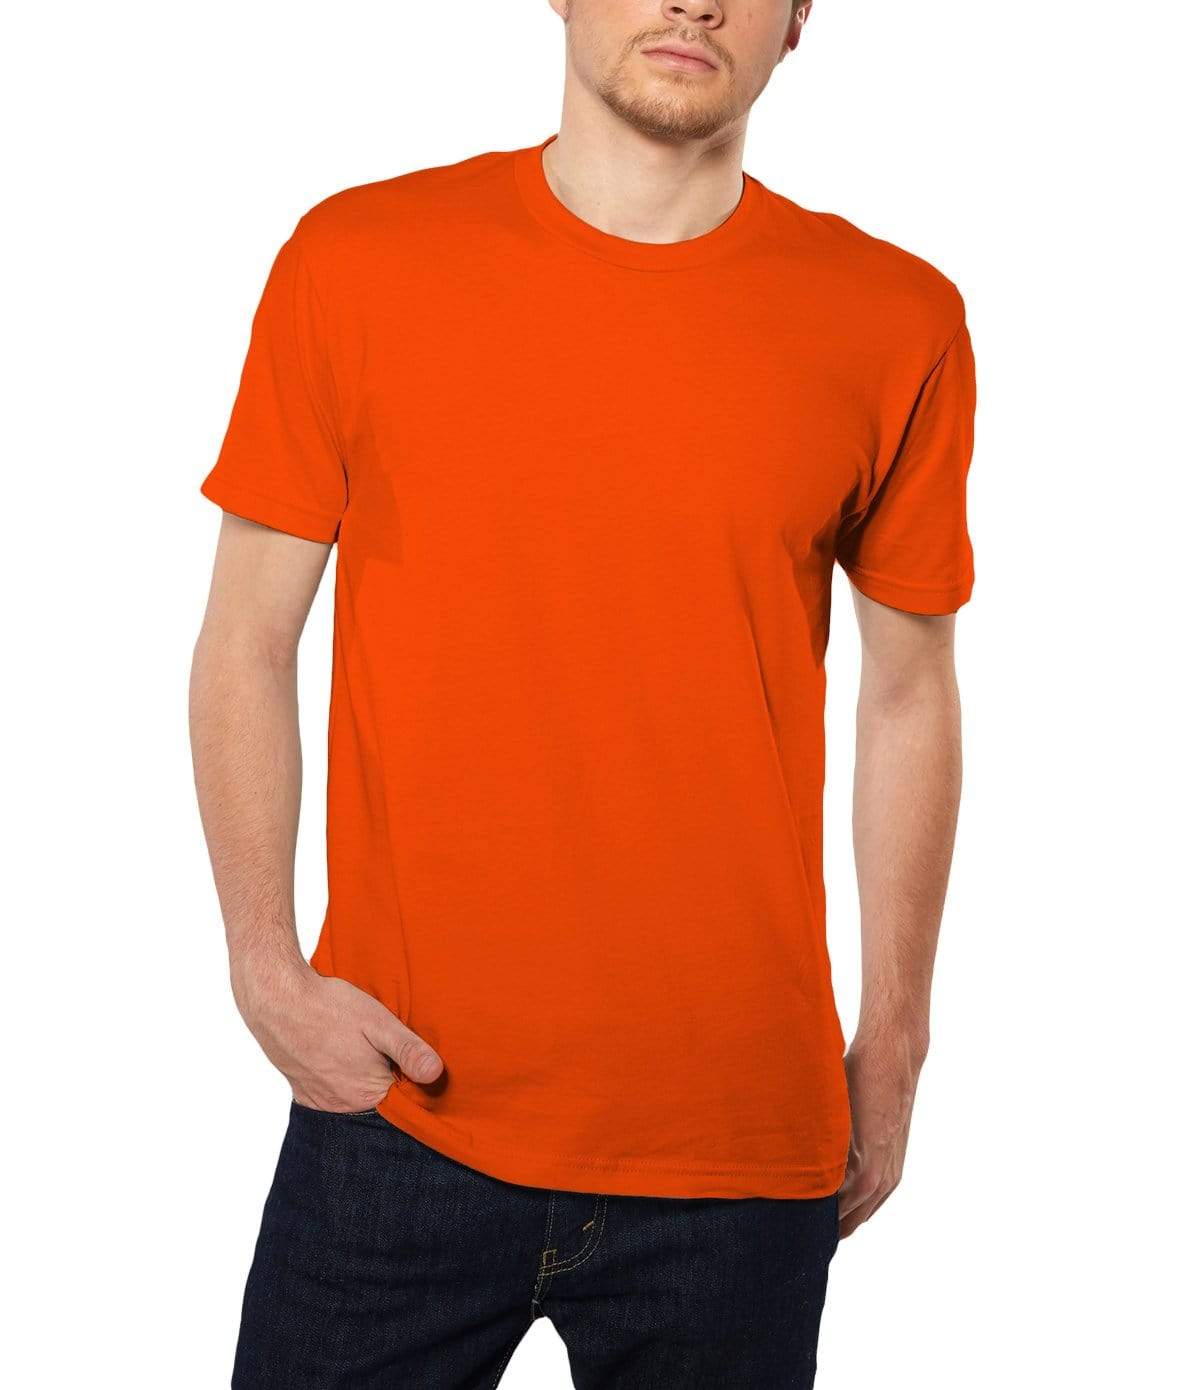 Mens Ridiculously Soft Neck 100% Cotton T-Shirt - Nayked Apparel